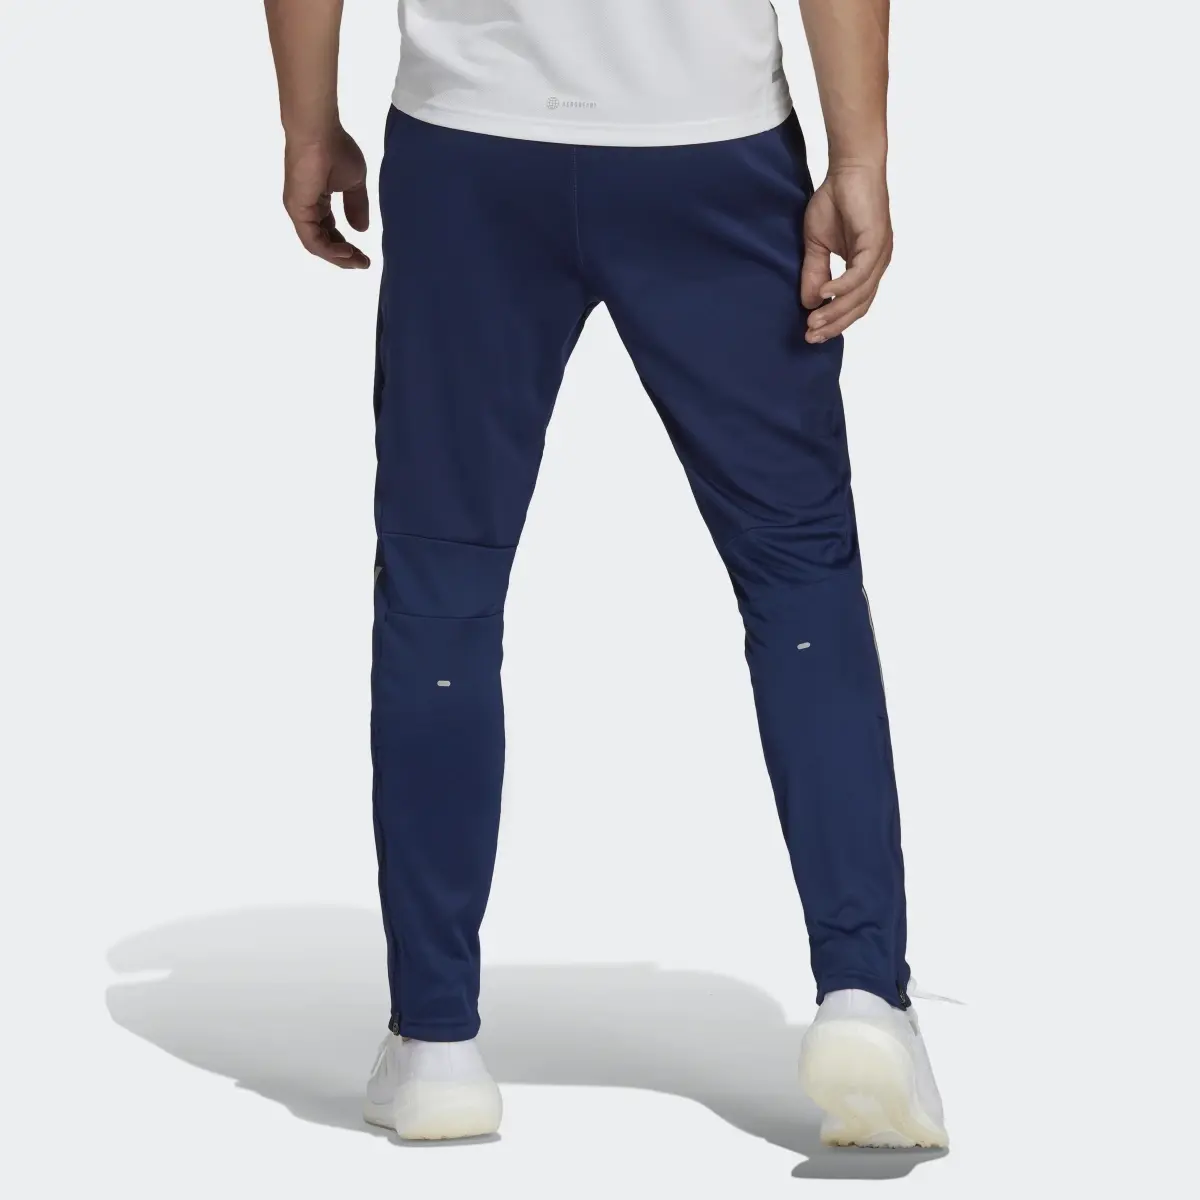 Adidas Own the Run Astro Knit Pants. 2